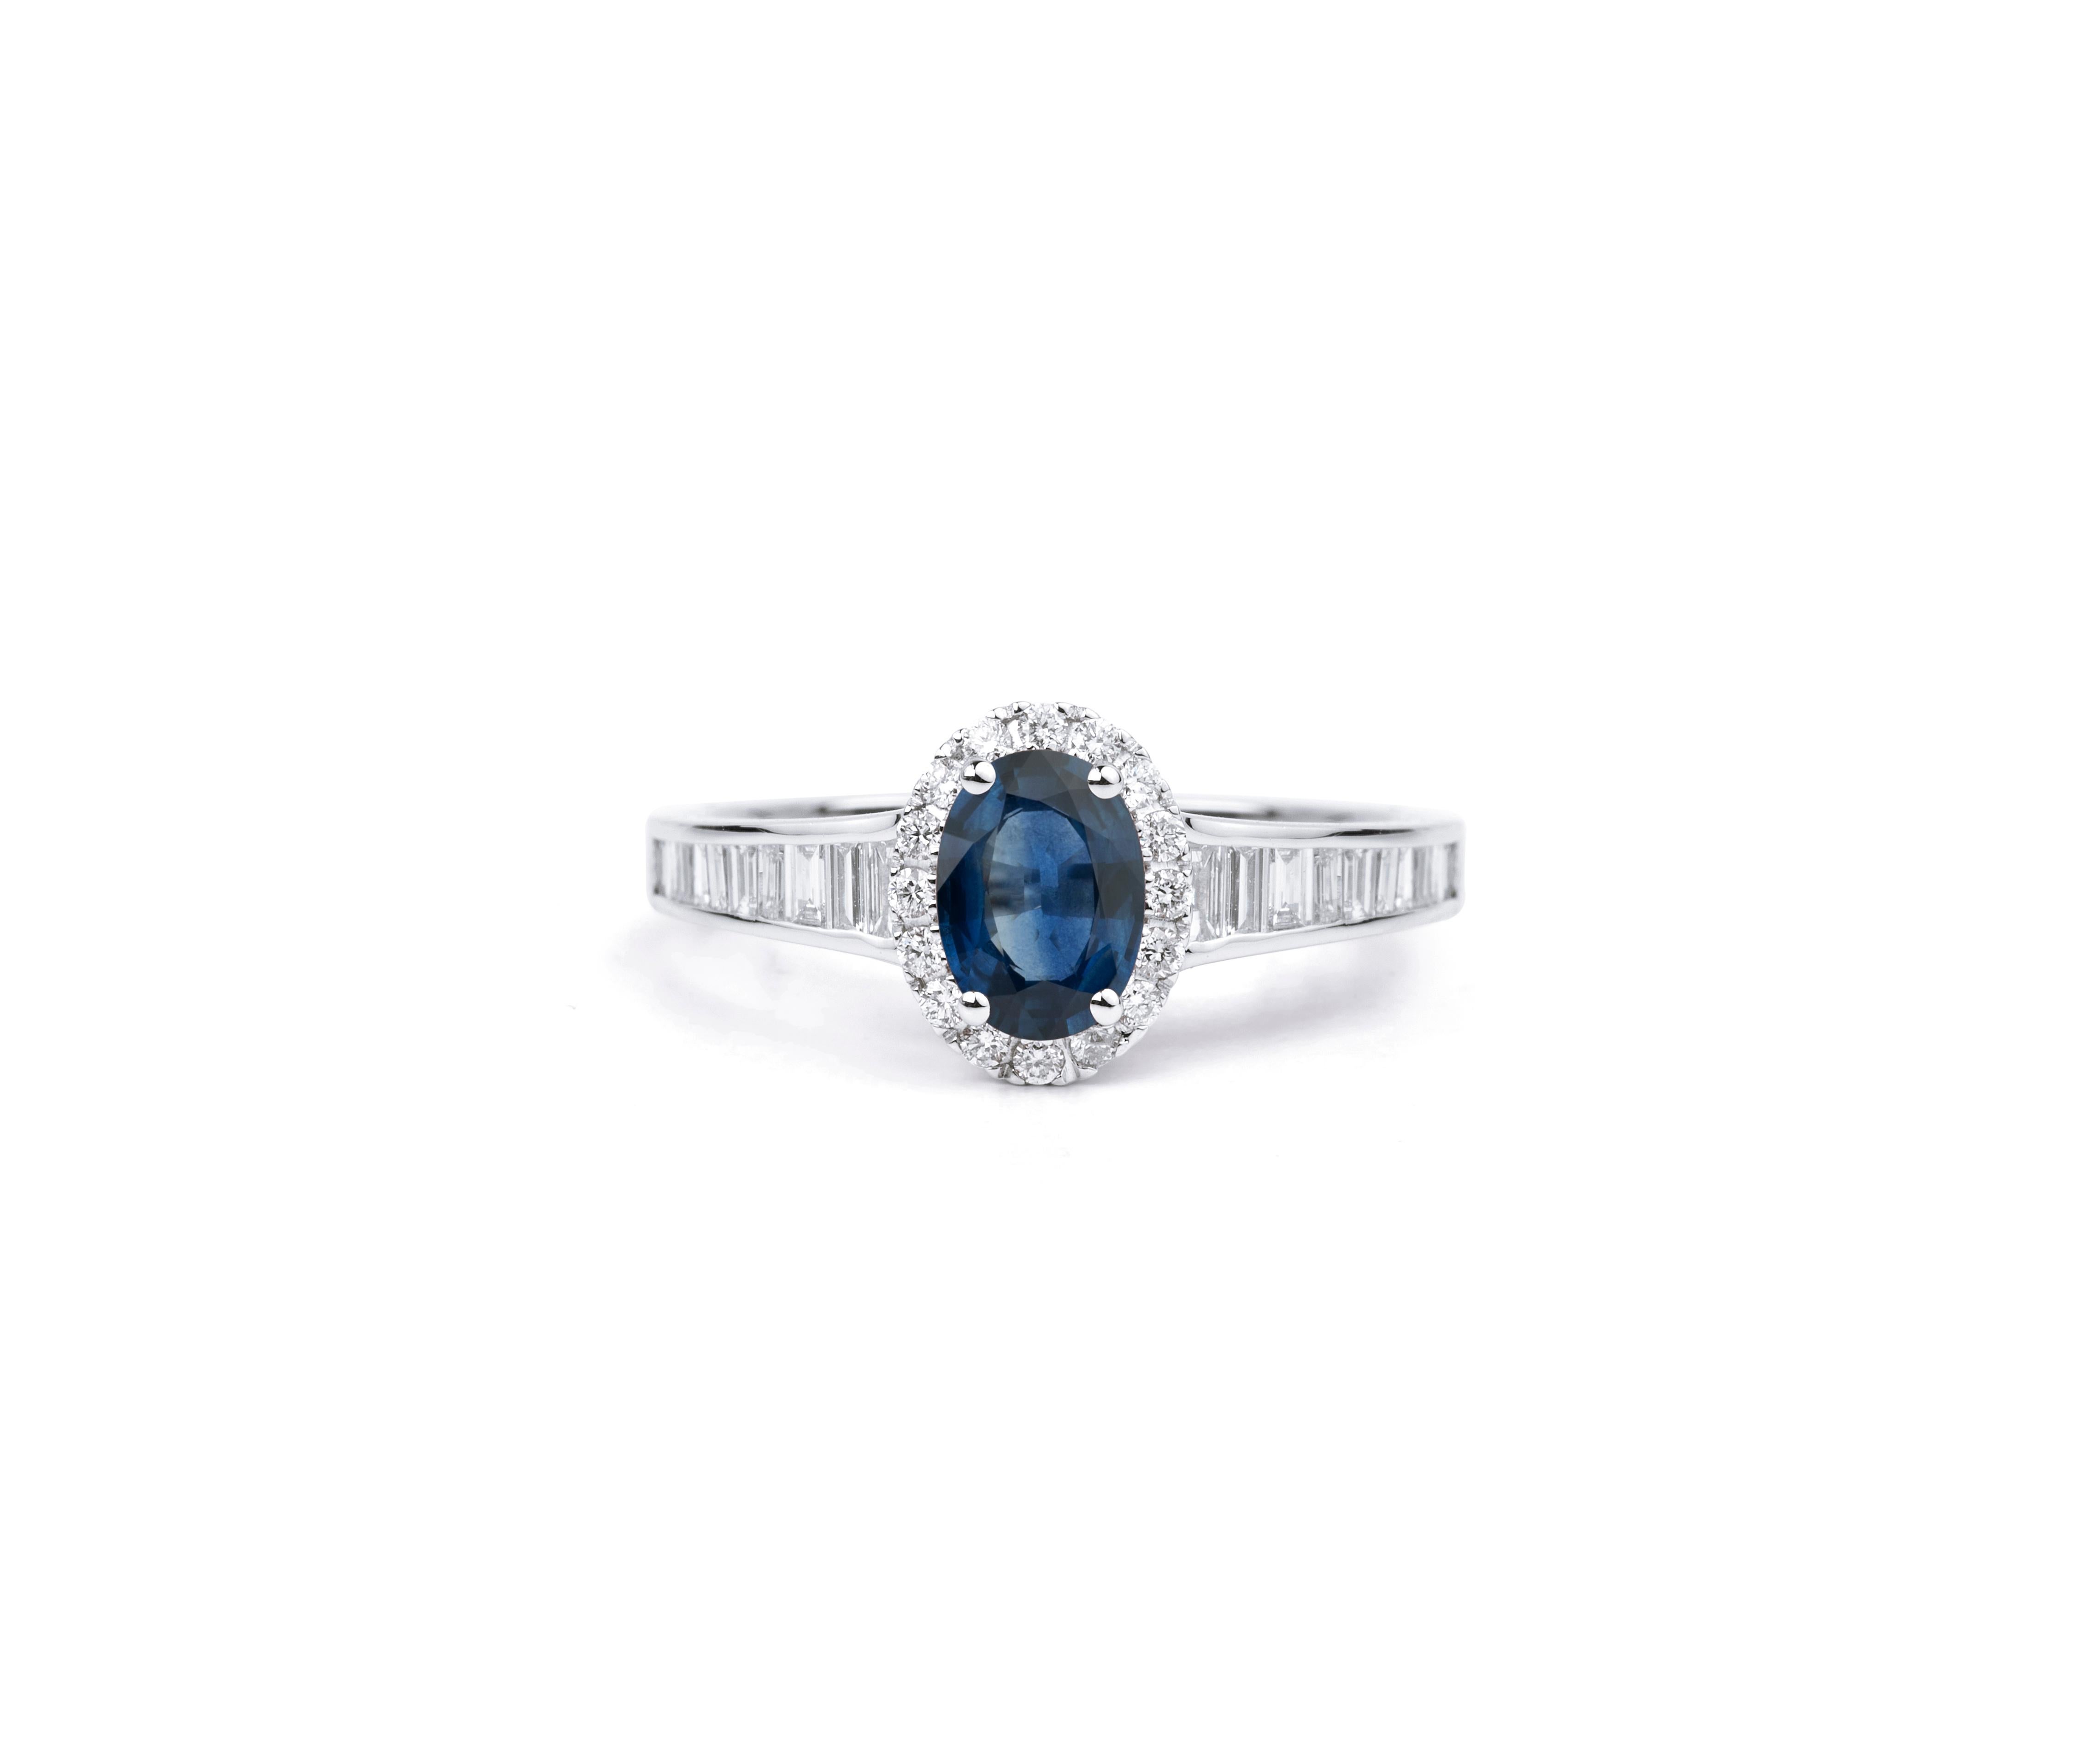 Oval Blue Sapphire Diamond Round / Baguette Cut, Halo Cocktail Engagement Ring

Available in 18k white gold.

Same design can be made also with other custom gemstones per request.

- Solid gold

- Diamond - approx. 0.65 carat

- Ruby - approx. 0.70